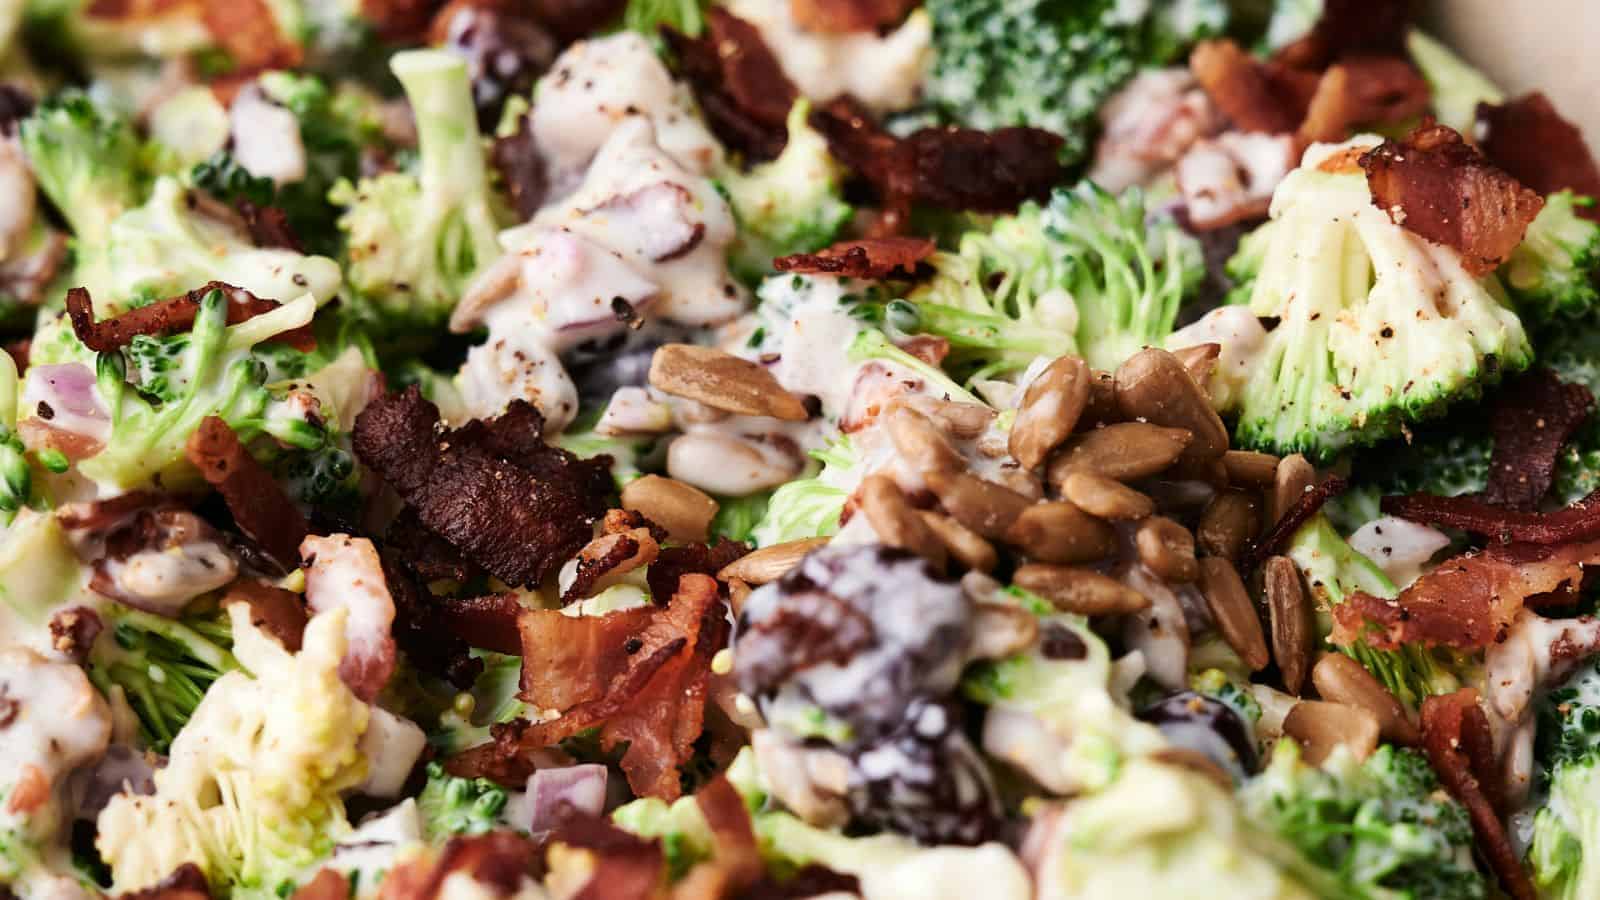 Close-up of a delightful broccoli salad with crispy bacon, sunflower seeds, and a creamy dressing. Mixed ingredients are visible in detail, showcasing the vibrant textures and colors of this fresh broccoli salad.